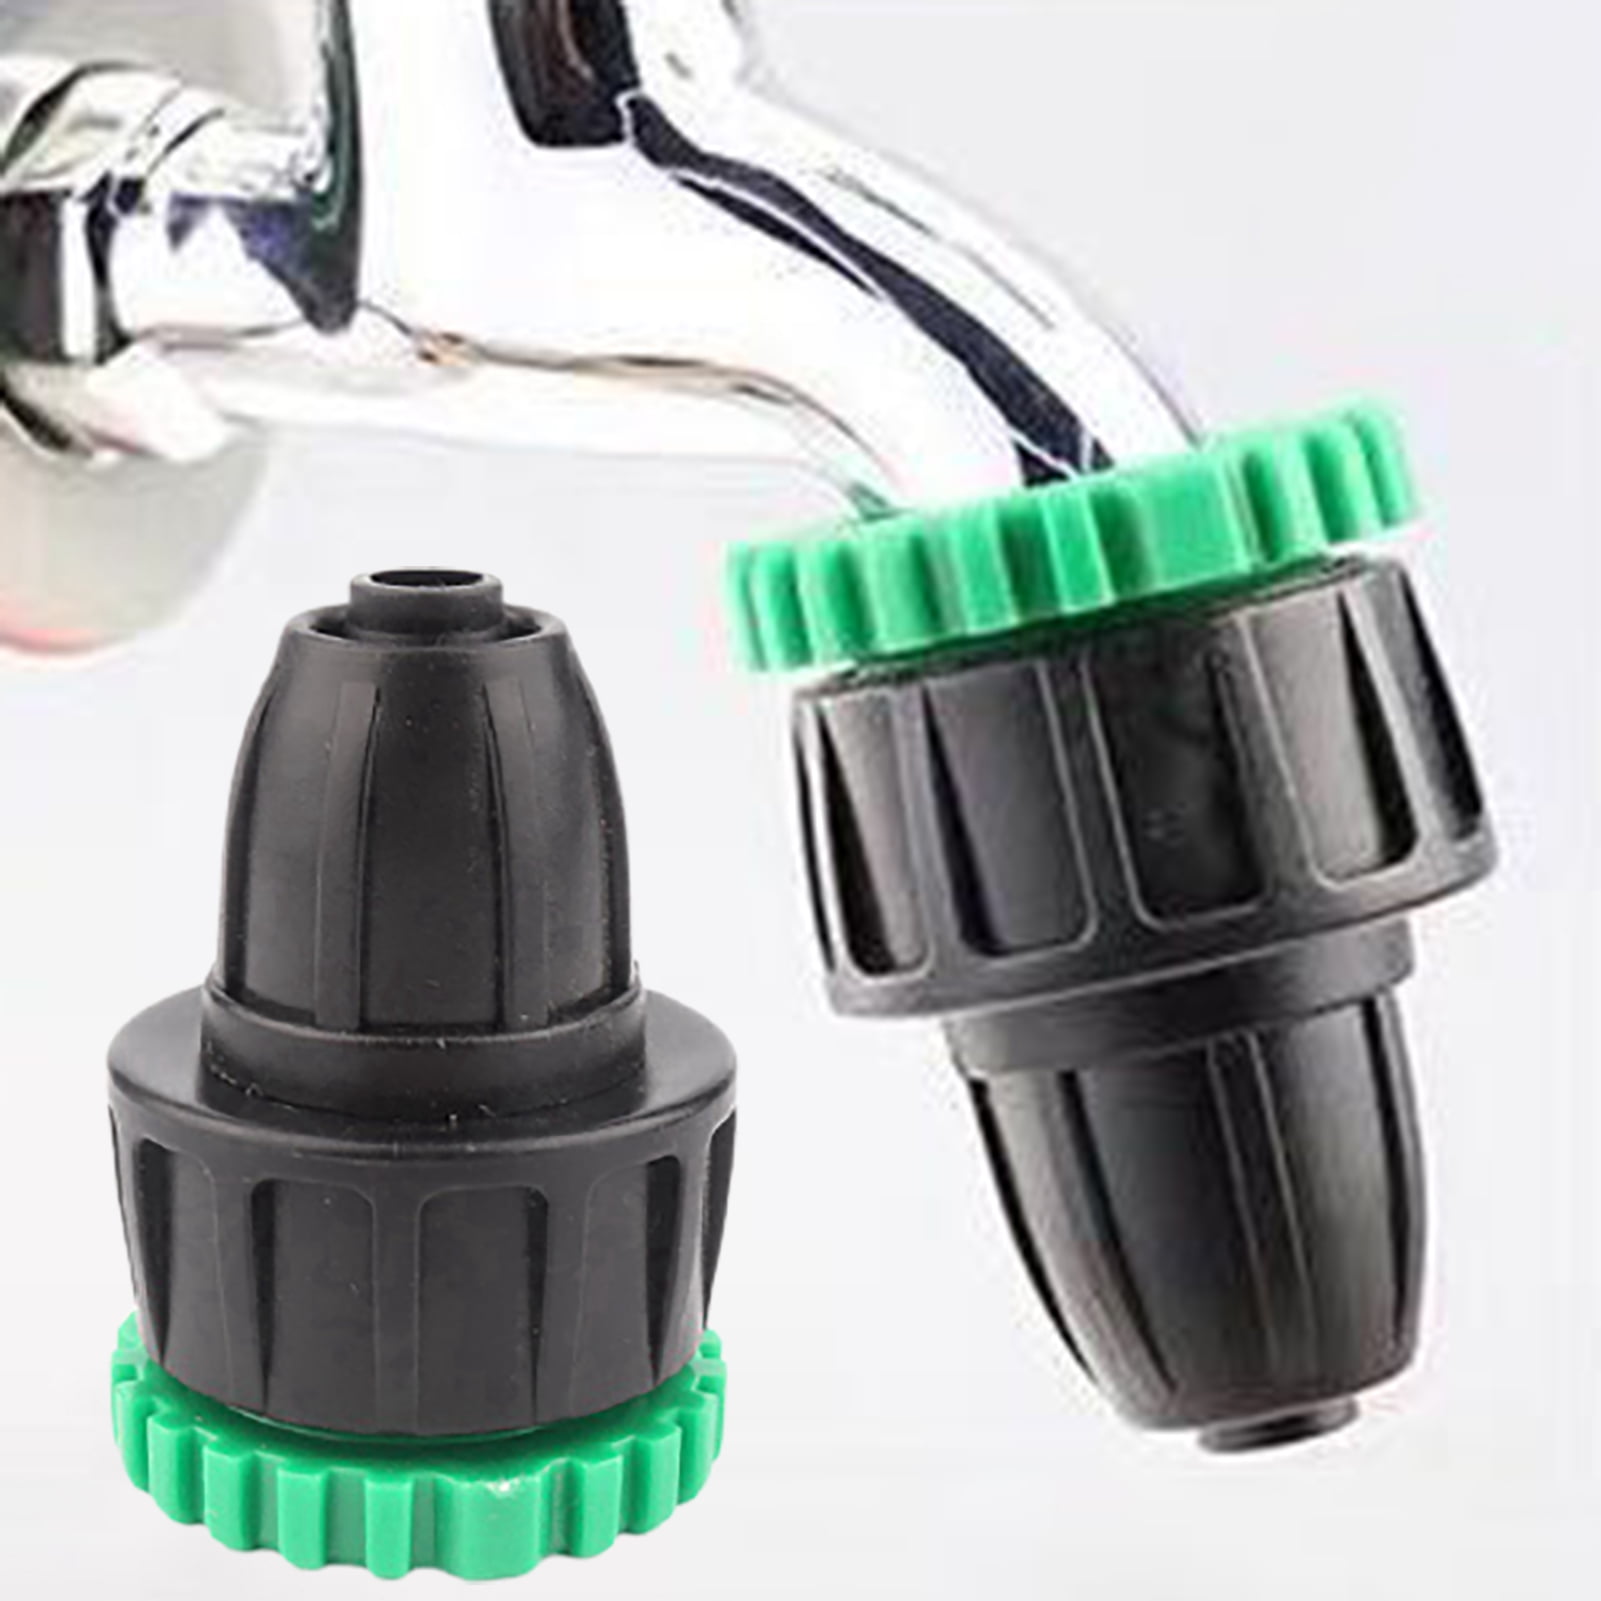 5pcs Set Garden Hose Water Irrigation Pipe Quick Connector Tube Tap Adapter 